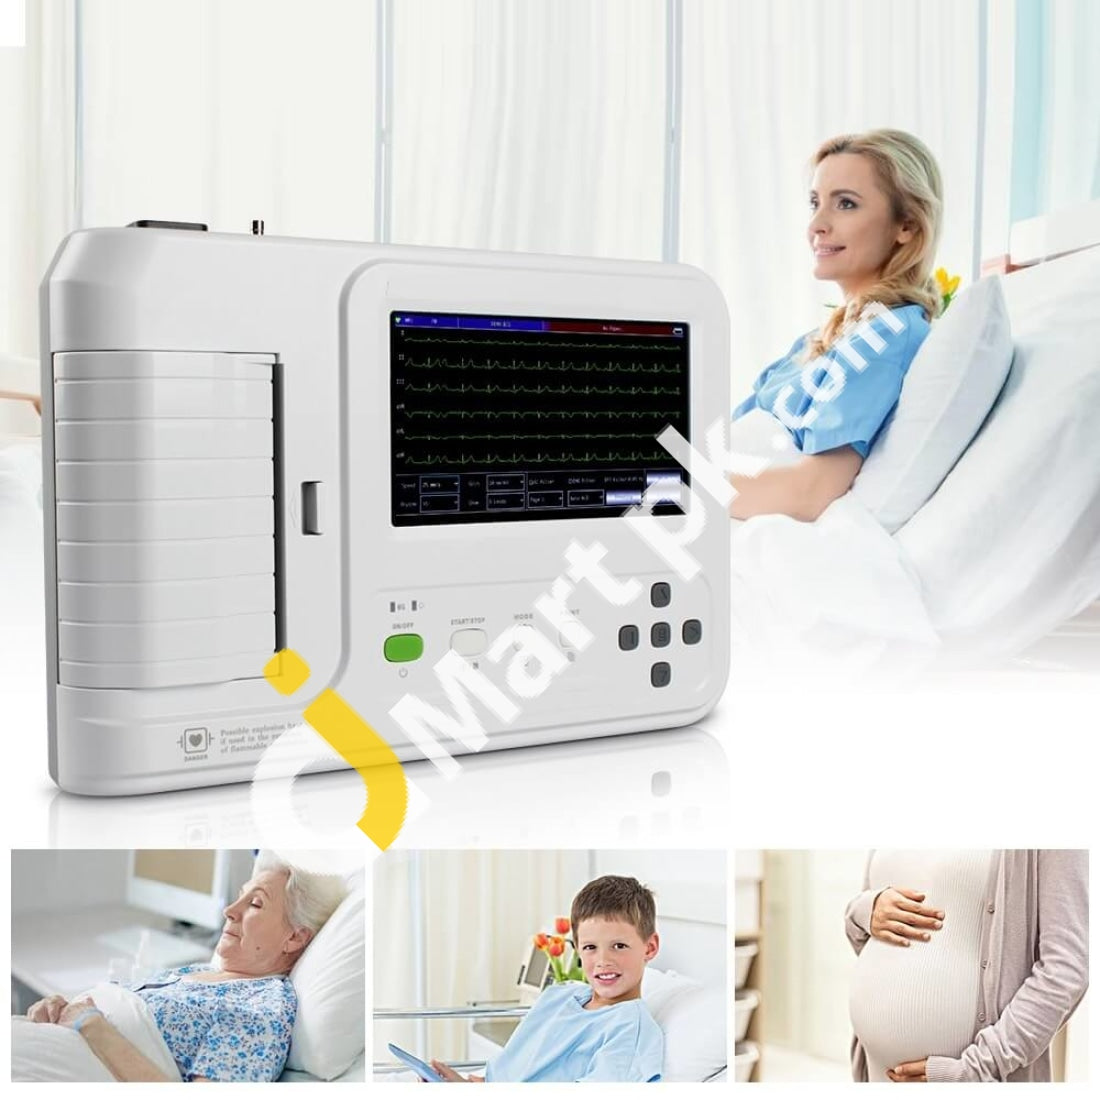 Contec New Digital Ecg 7 Touch Screen Electrocardiograph 6 Channel 12 Lead Usb Ekg Machine Imported